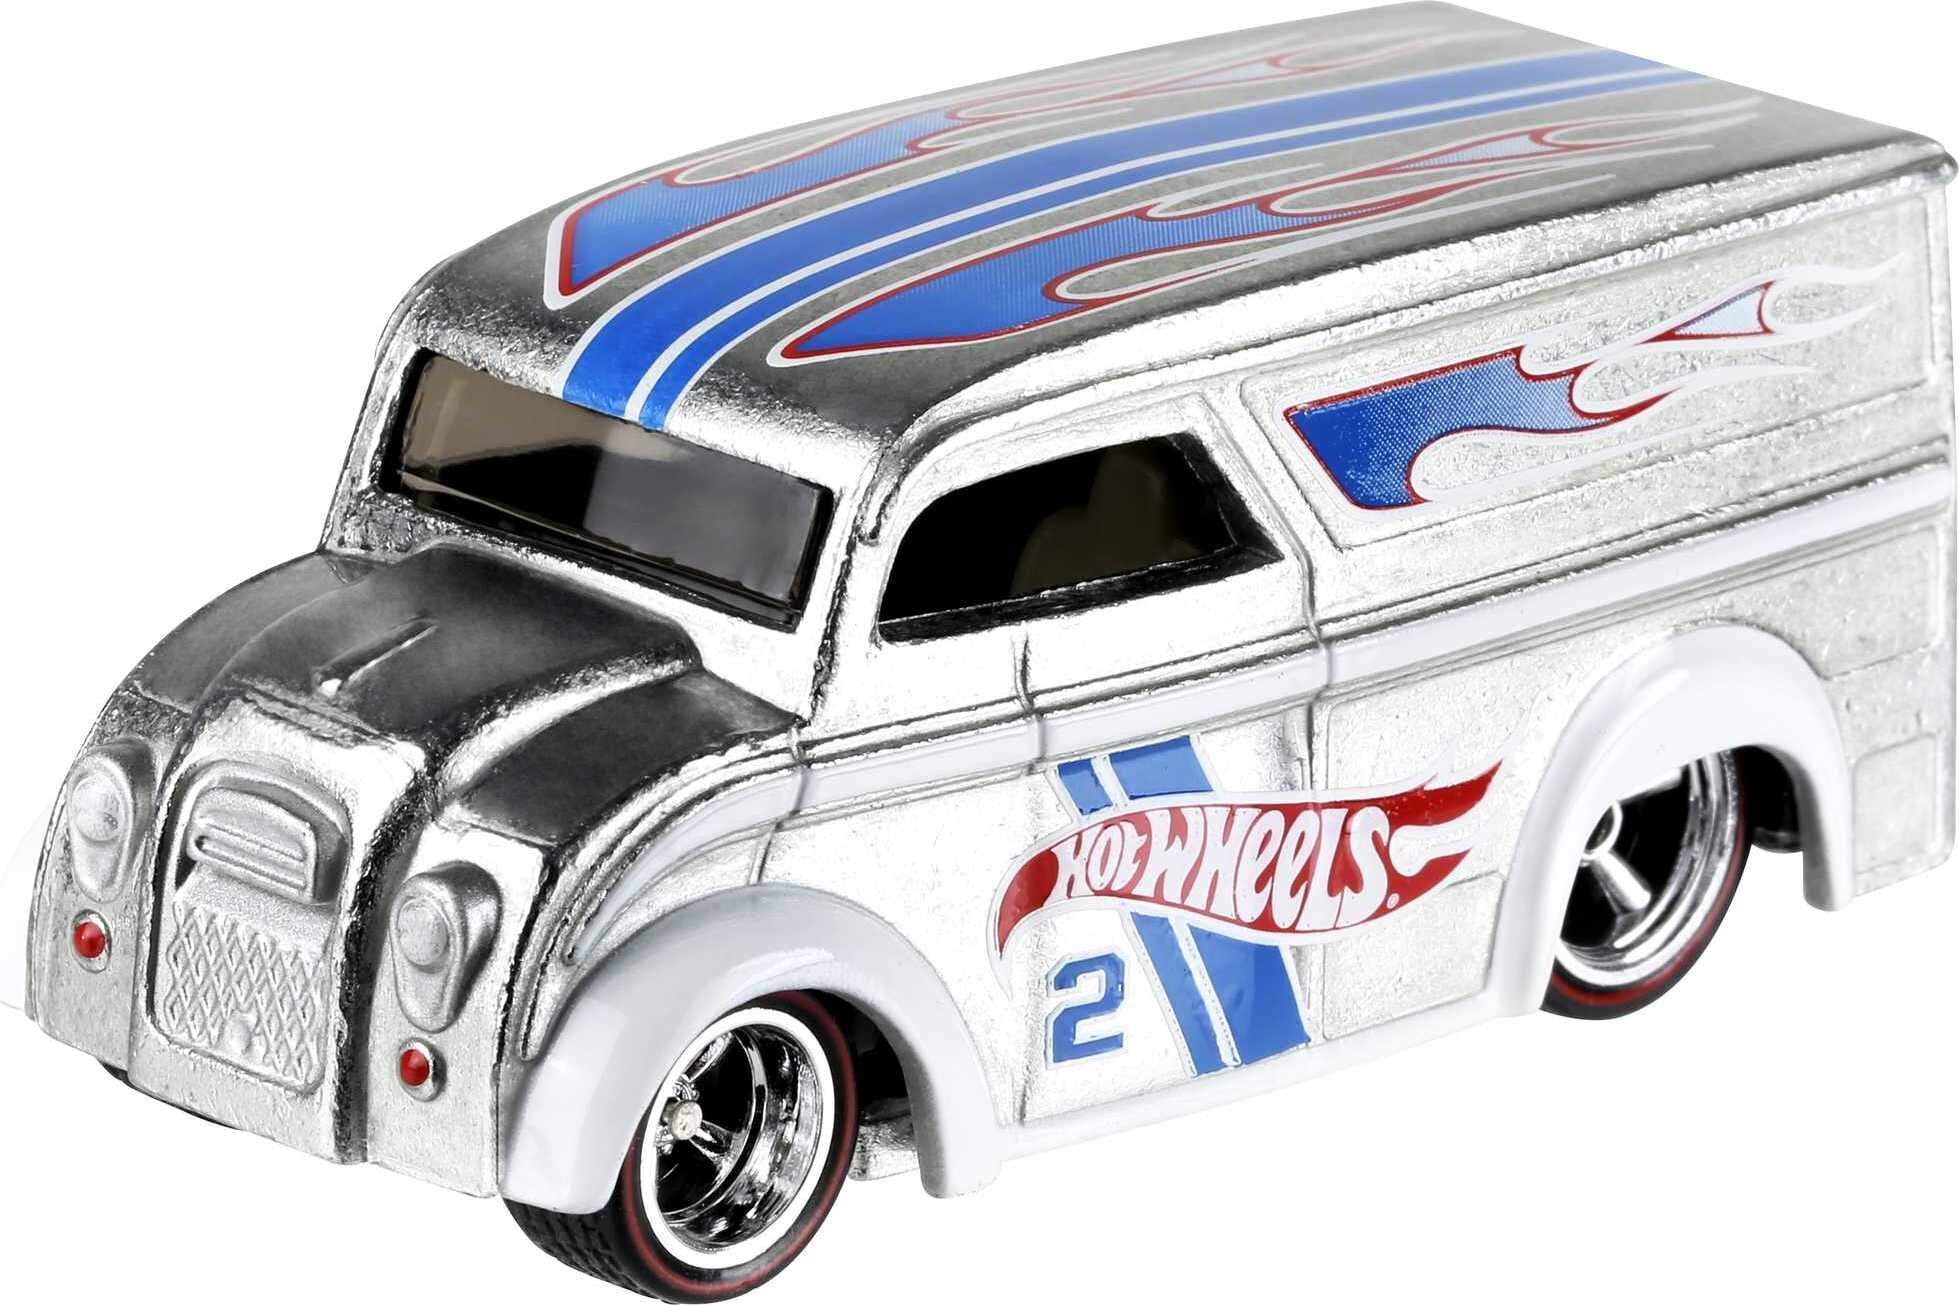 Hot Wheels Collector Edition Dairy Delivery Vehicle $9.15 + Free S&H w/ Walmart+ or $35+